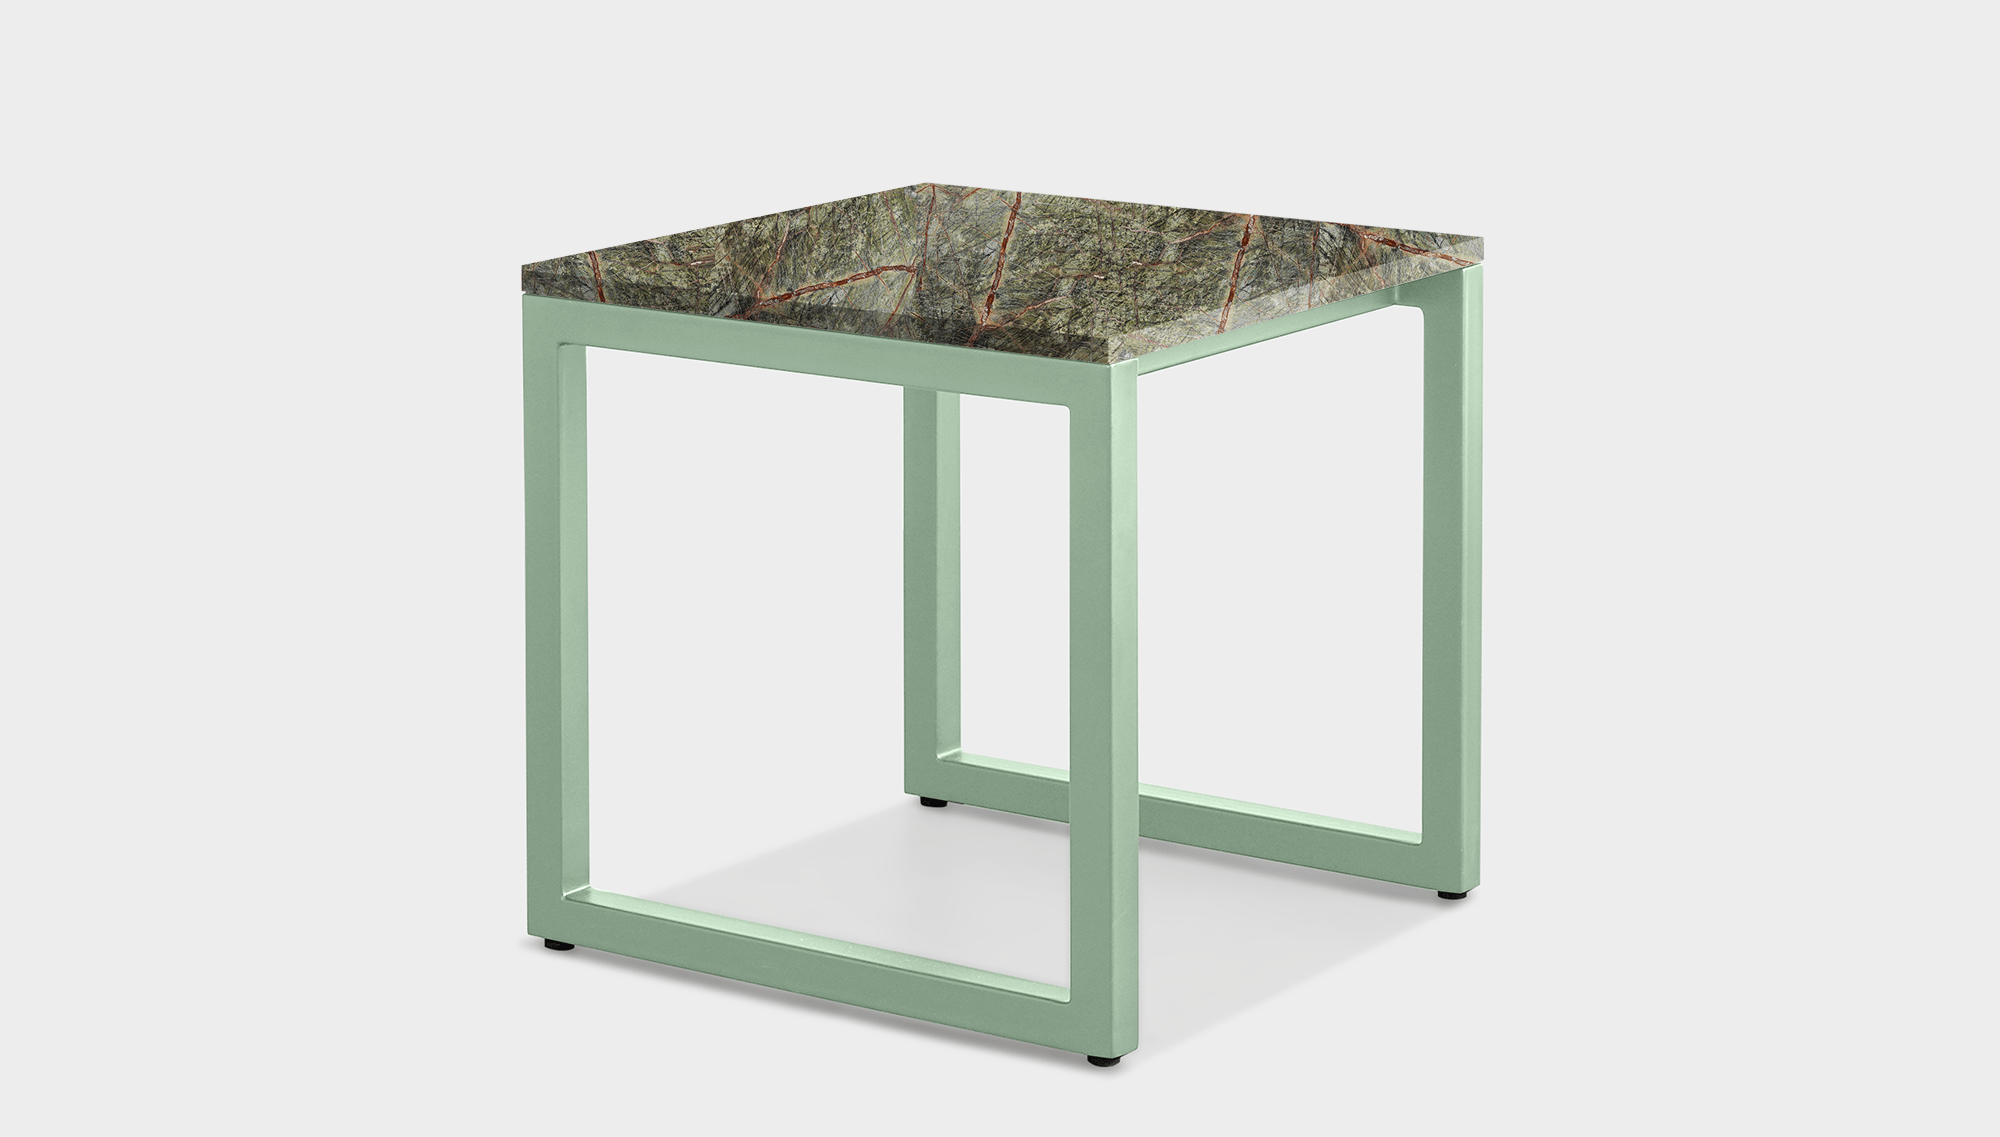 reddie-raw square side table 45W x 45D x 45H *cm / Stone~Forest Green / Metal~Mint Suzy Side Table Square